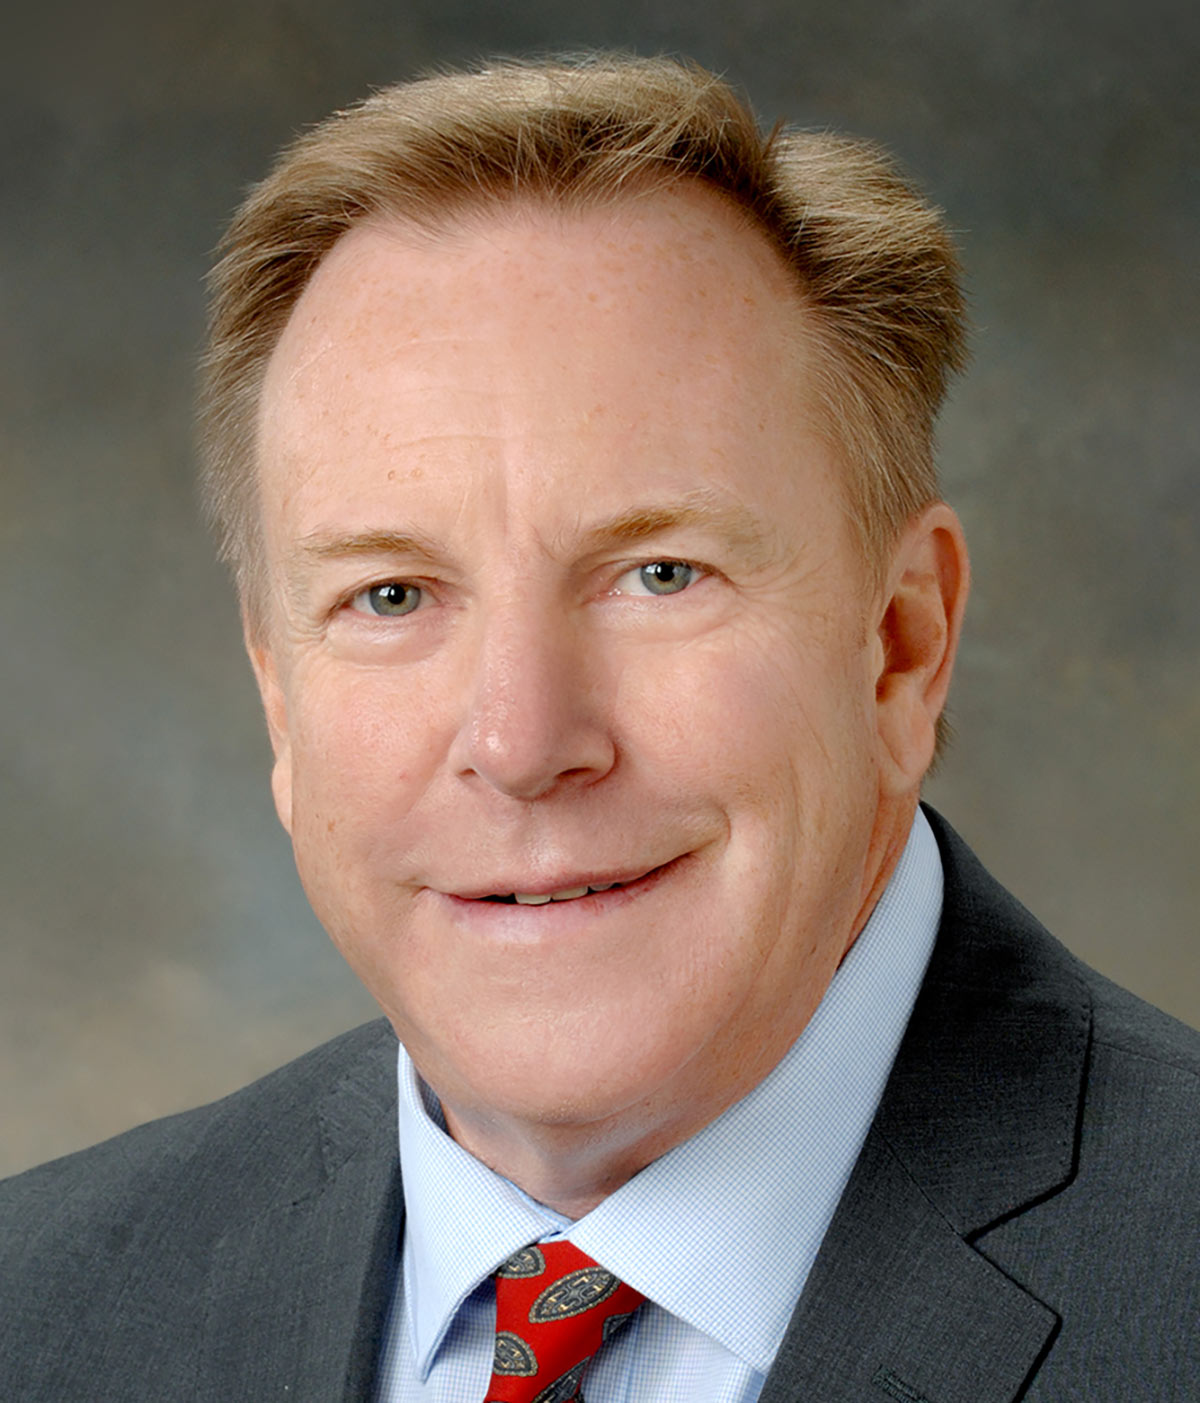 Portrait headshot photo of Tom Reilly grinning in a dark grey blazer business suit and light sky blue button-up dress shirt underneath with a red colored tie that has multi-color oval shaped pattern designs on it